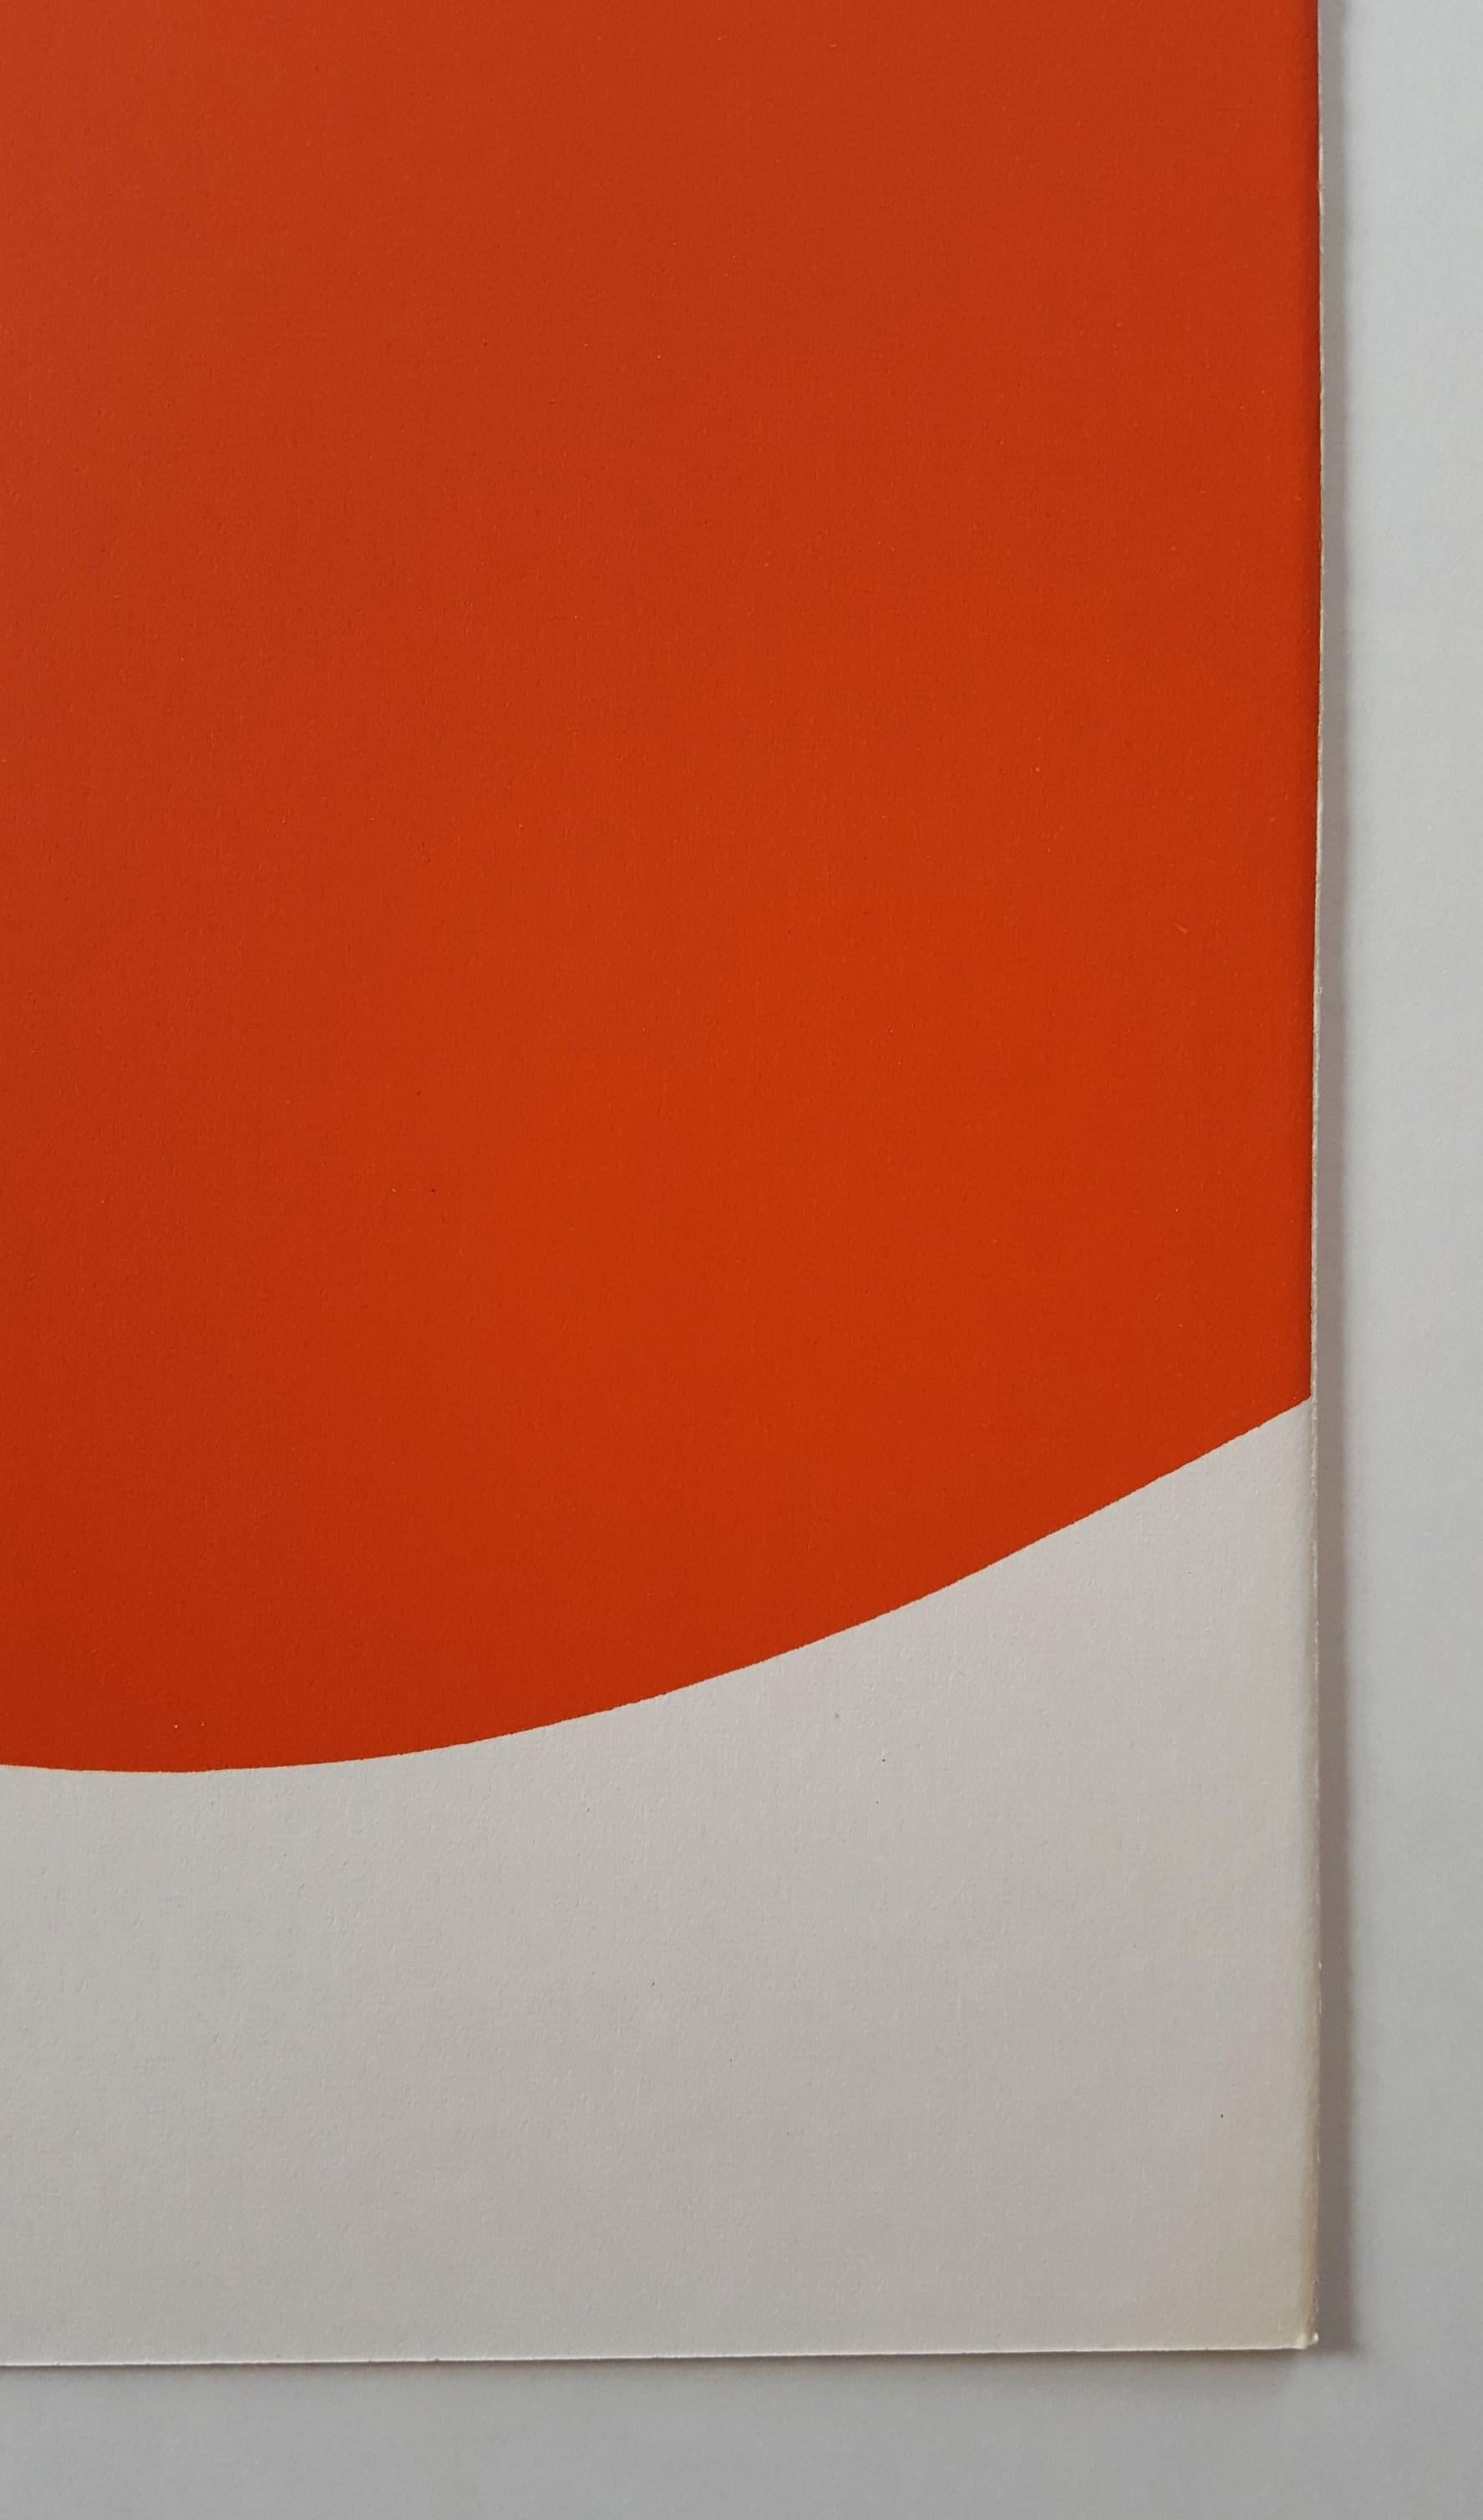 An original lithograph on smooth wove paper by American artist Ellsworth Kelly (1923-2015) 